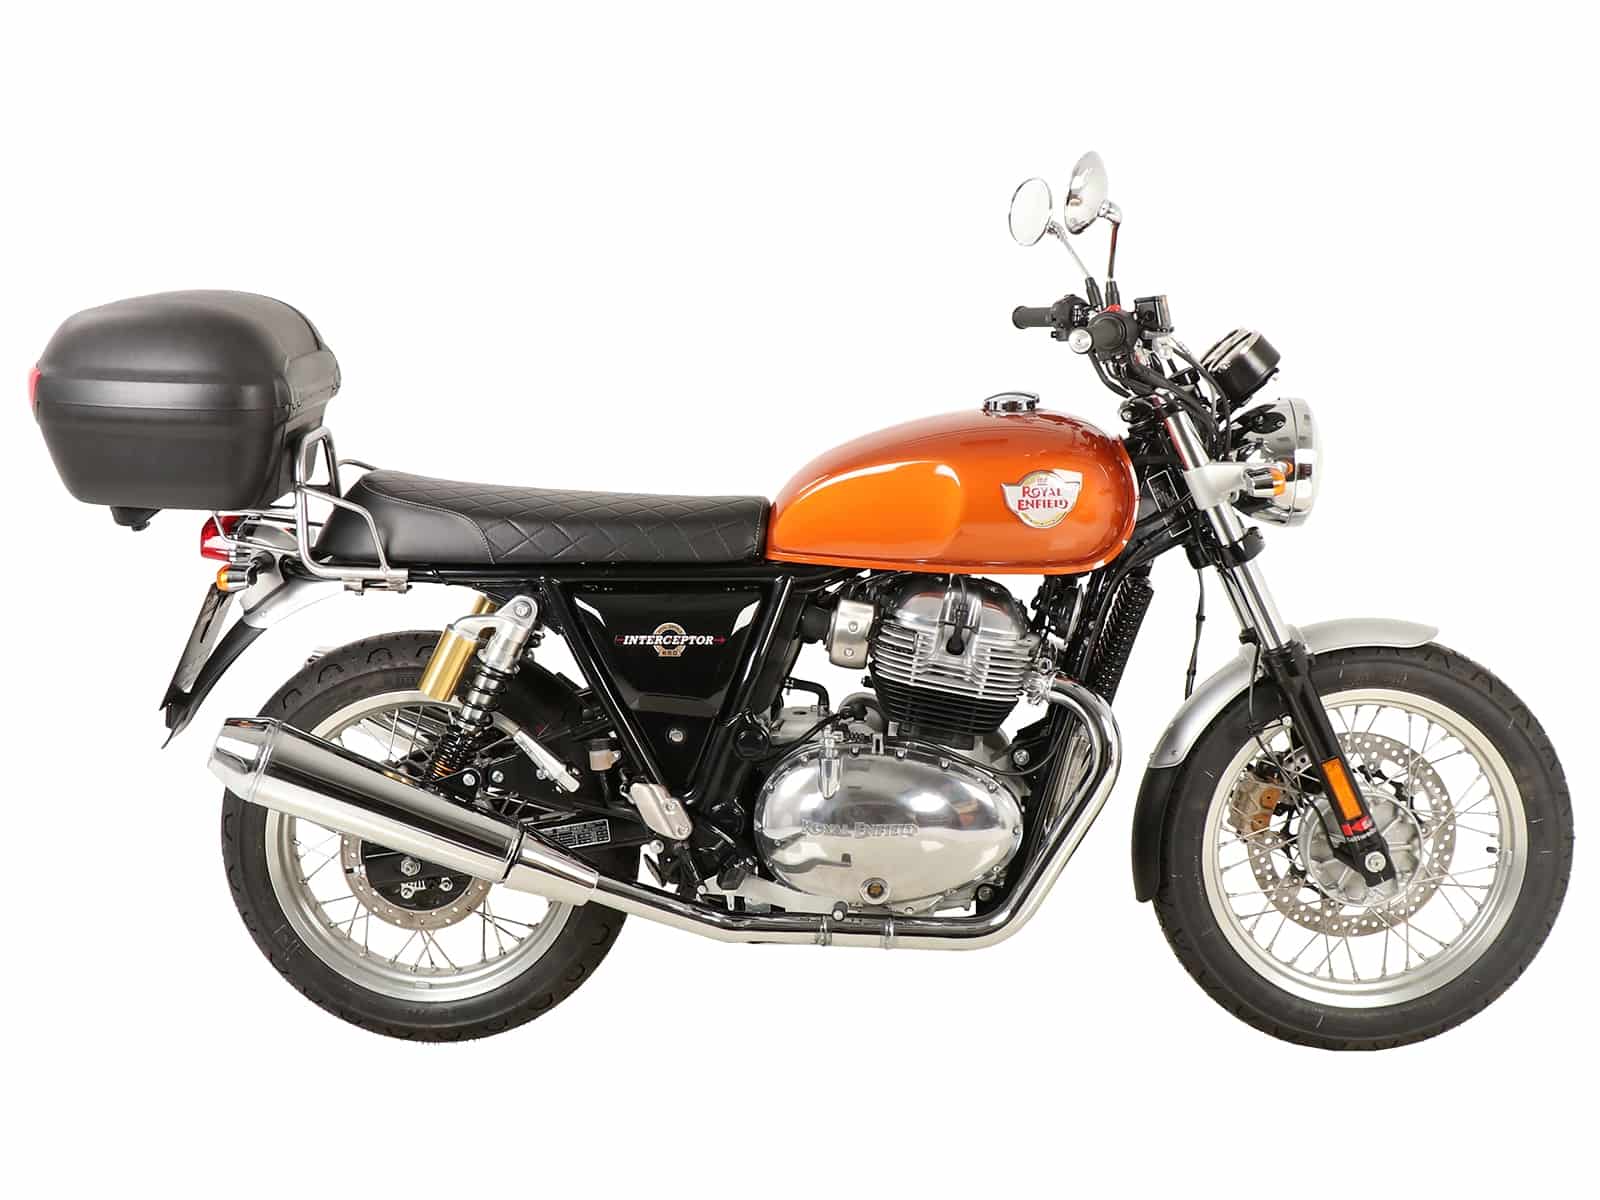 Topcase carrier tube-type black for Royal Royal Enfield Interceptor (2018-) / Continental 650 / GT 650 (2019-)